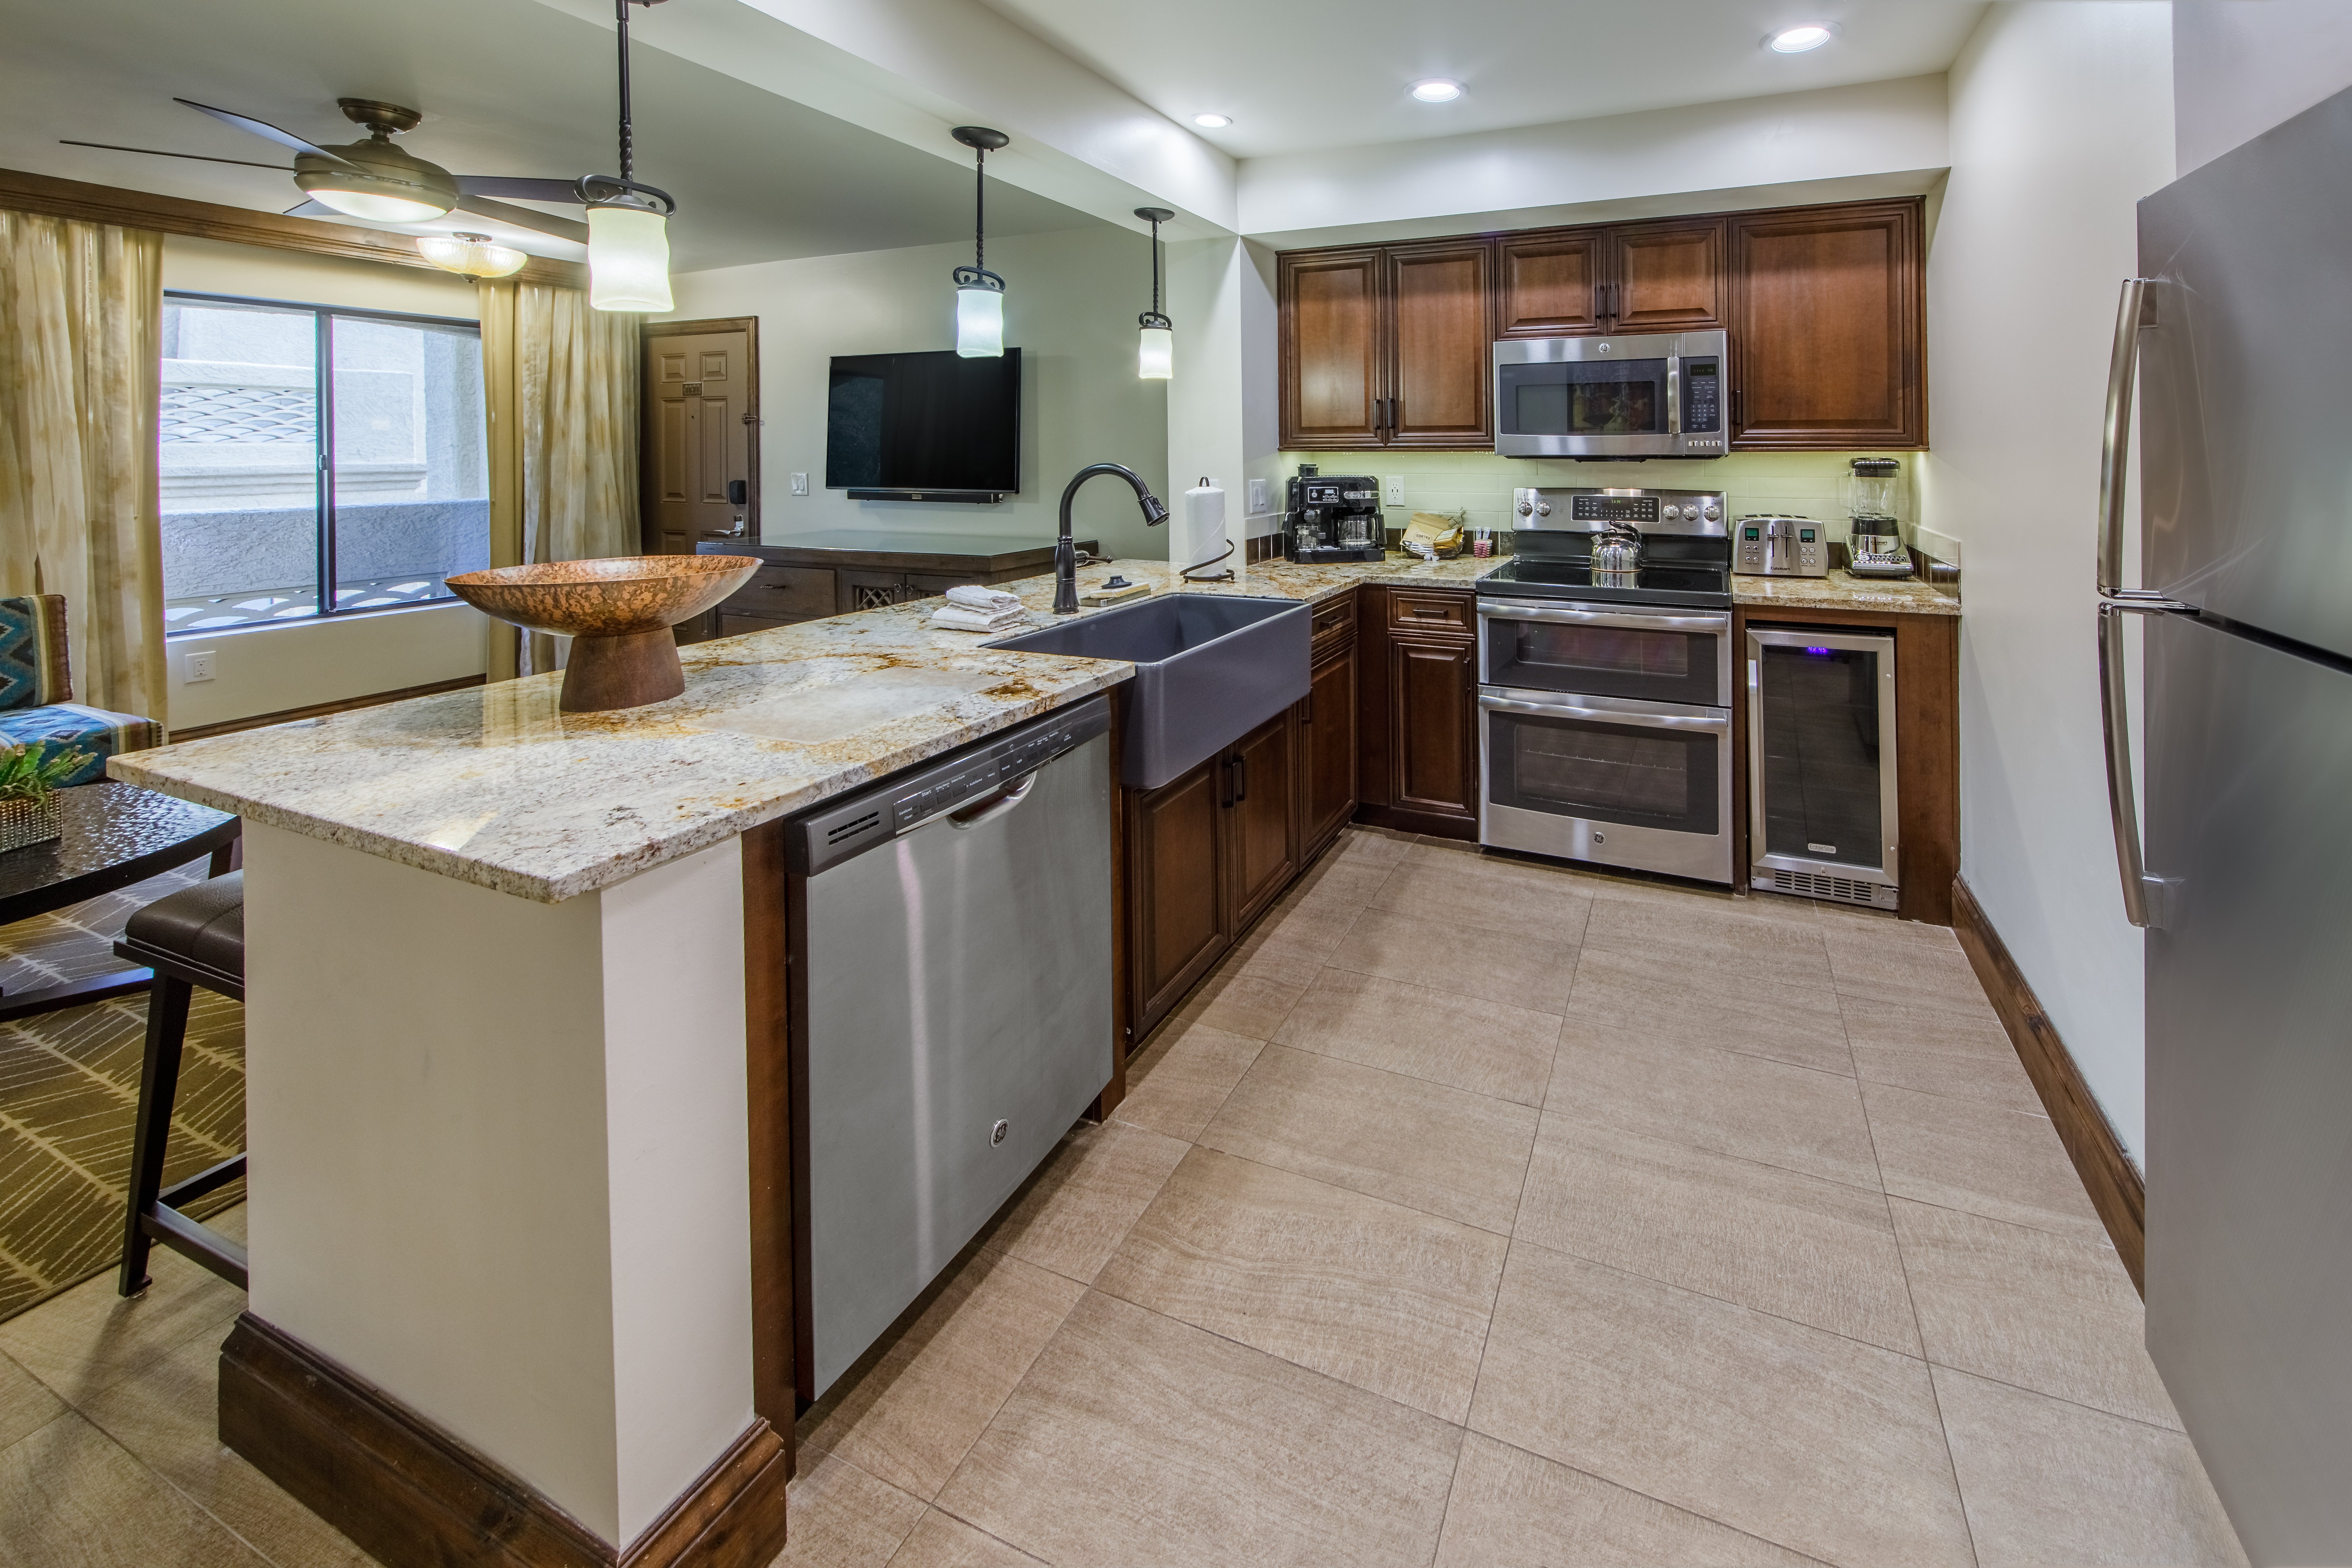 Signature collection kitchen offers upgraded appliances